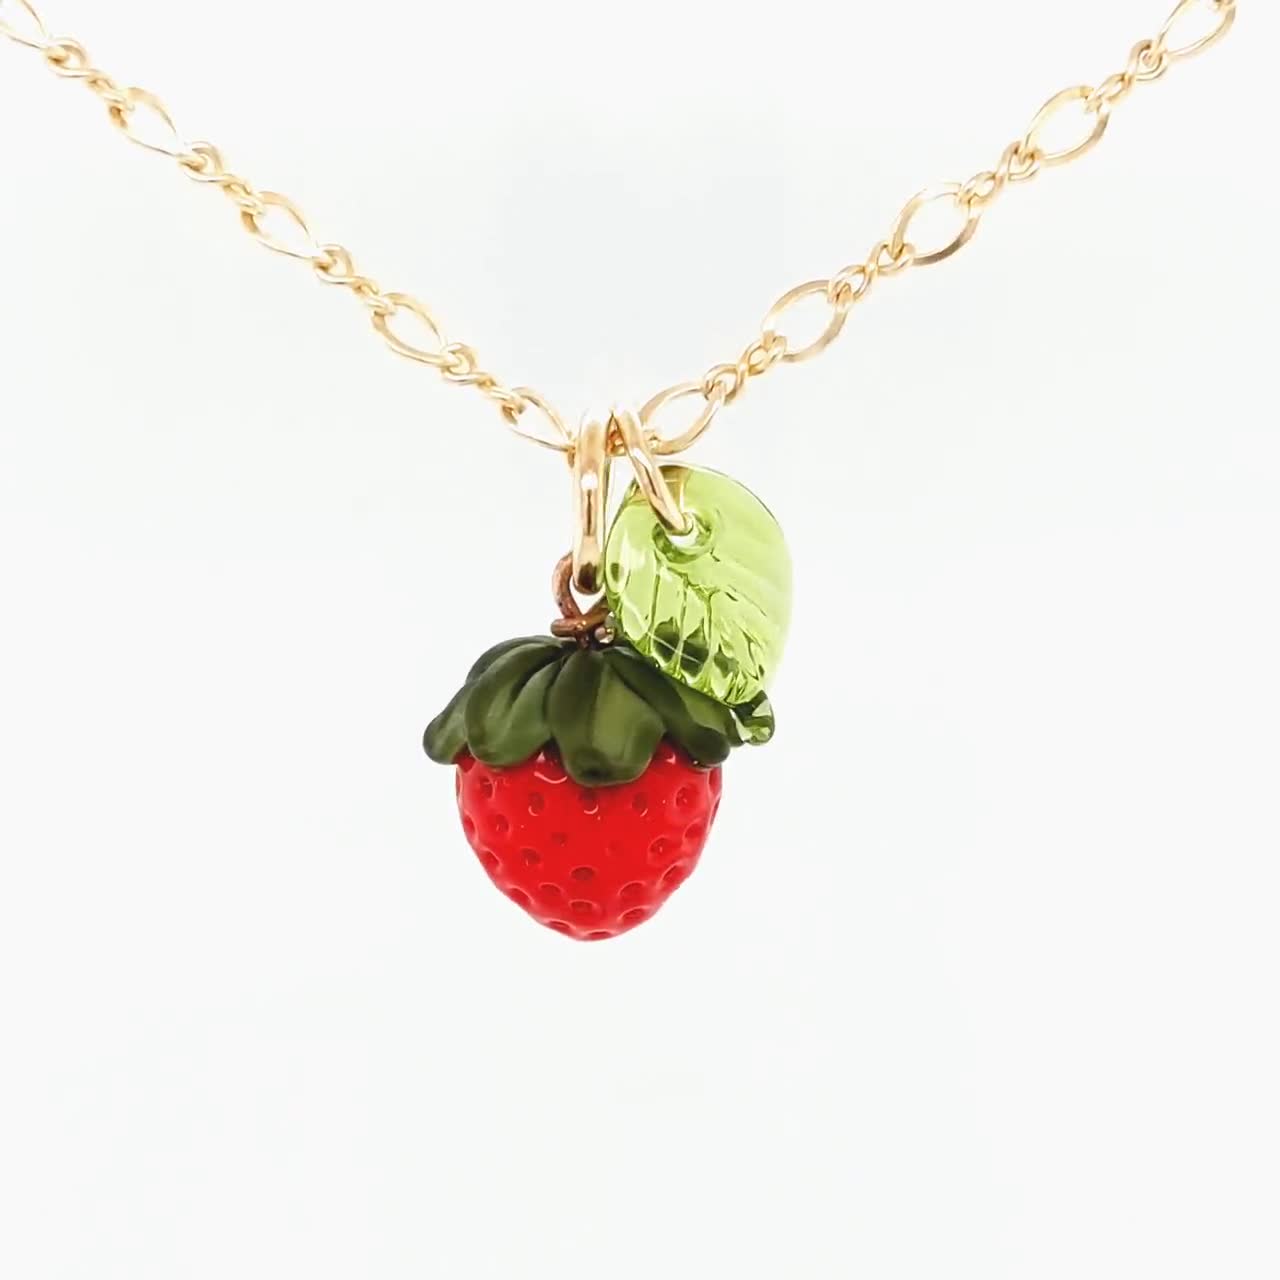 Is That The New Strawberry Pendant Necklace ??